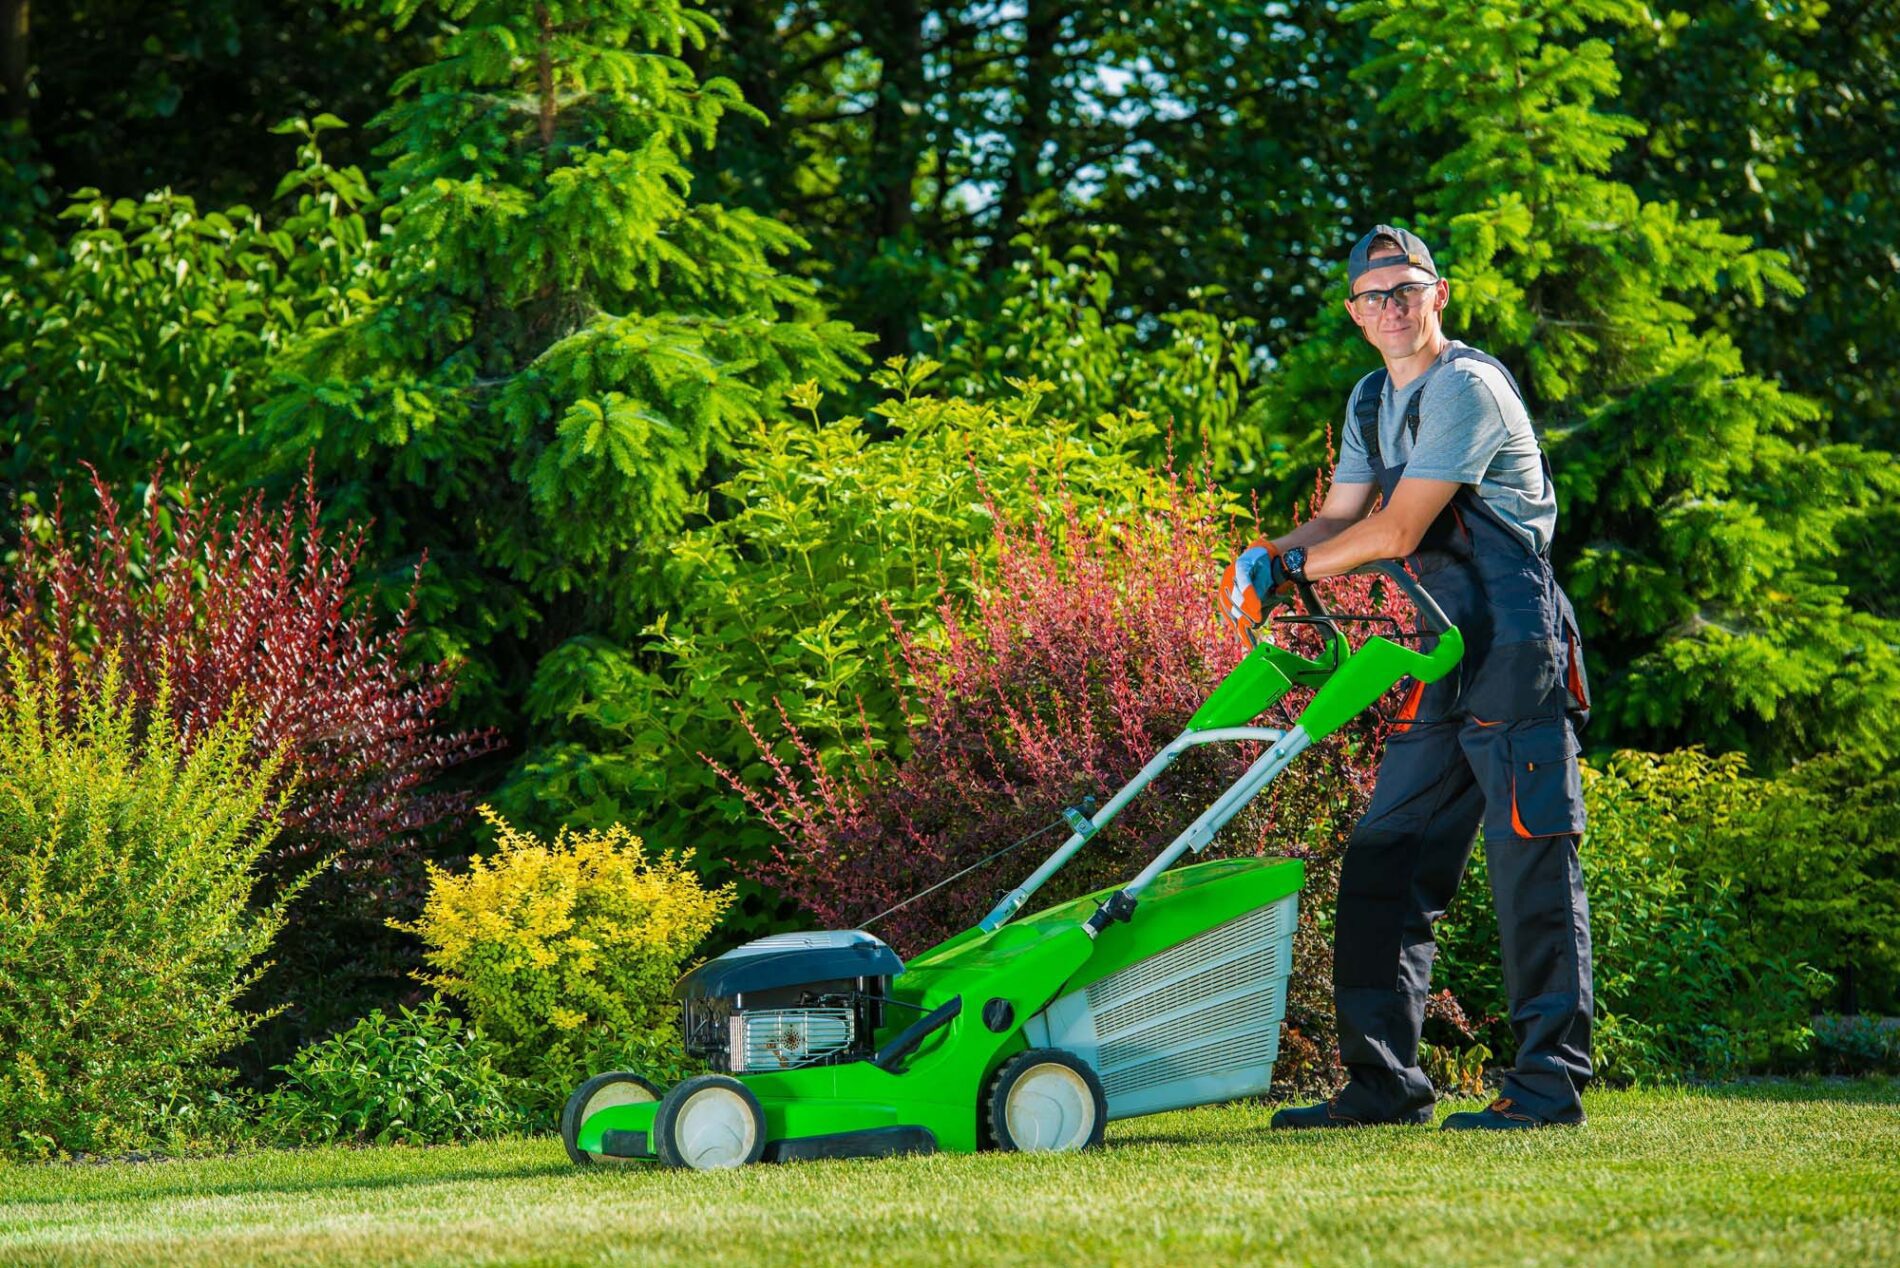 Lawn Care Services Allen TX - My Neighbor Services